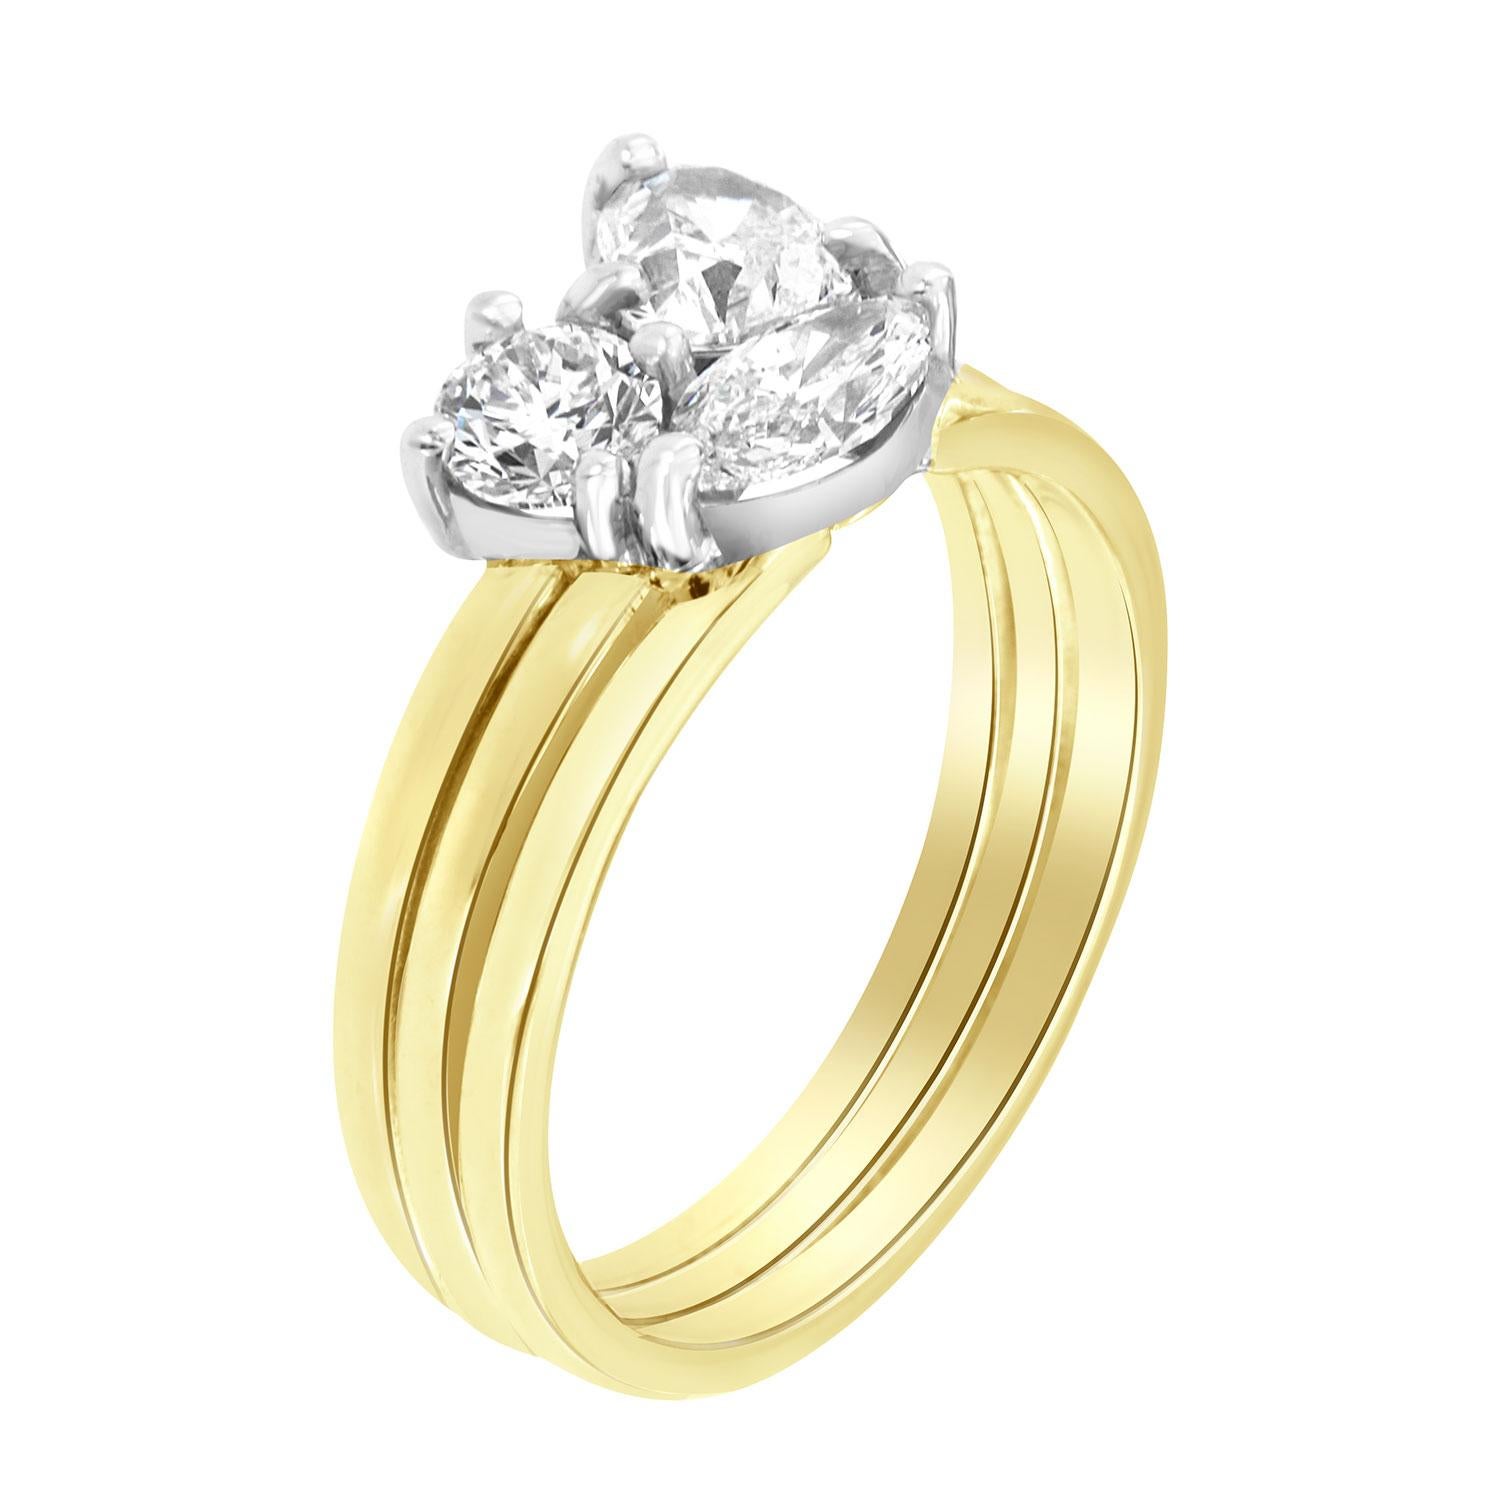 This one-of-a-kind original designed ring features three mixed-shaped diamonds. This harmonious collaboration of  Heart, Round, and Marquise is set in white gold on a 4.8 MM tube yellow gold band. All three diamonds are GIA certified.

Diamond